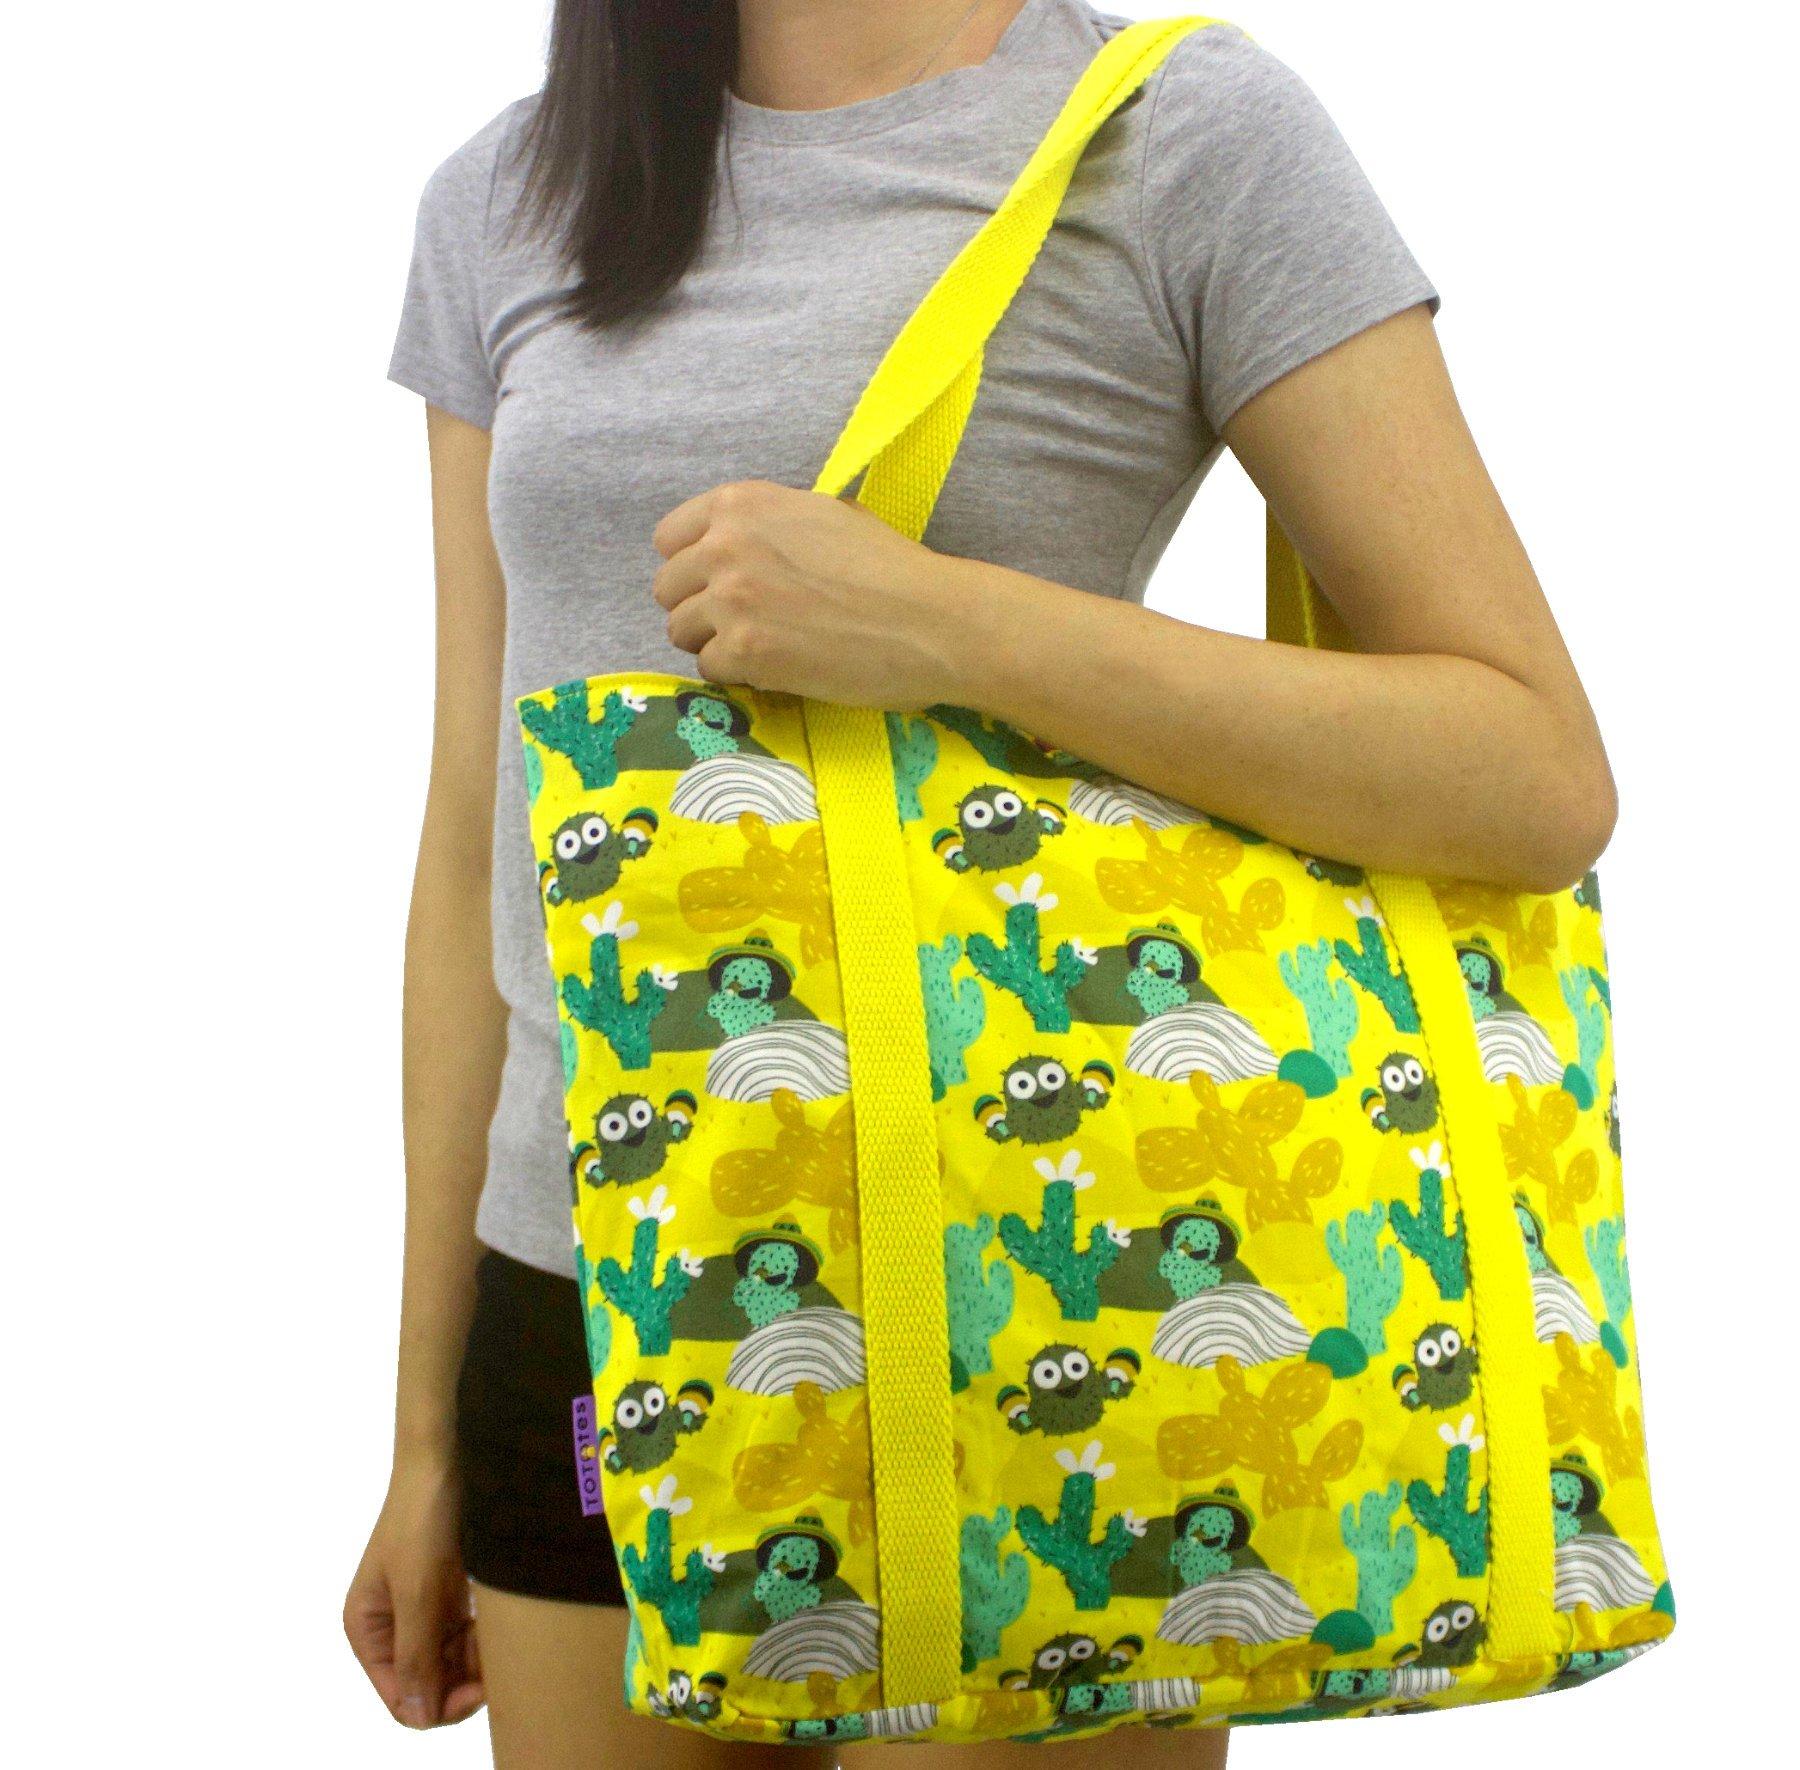 Bright Yellow Cactus All Over Print Large Market Cotton Tote Bag for Women